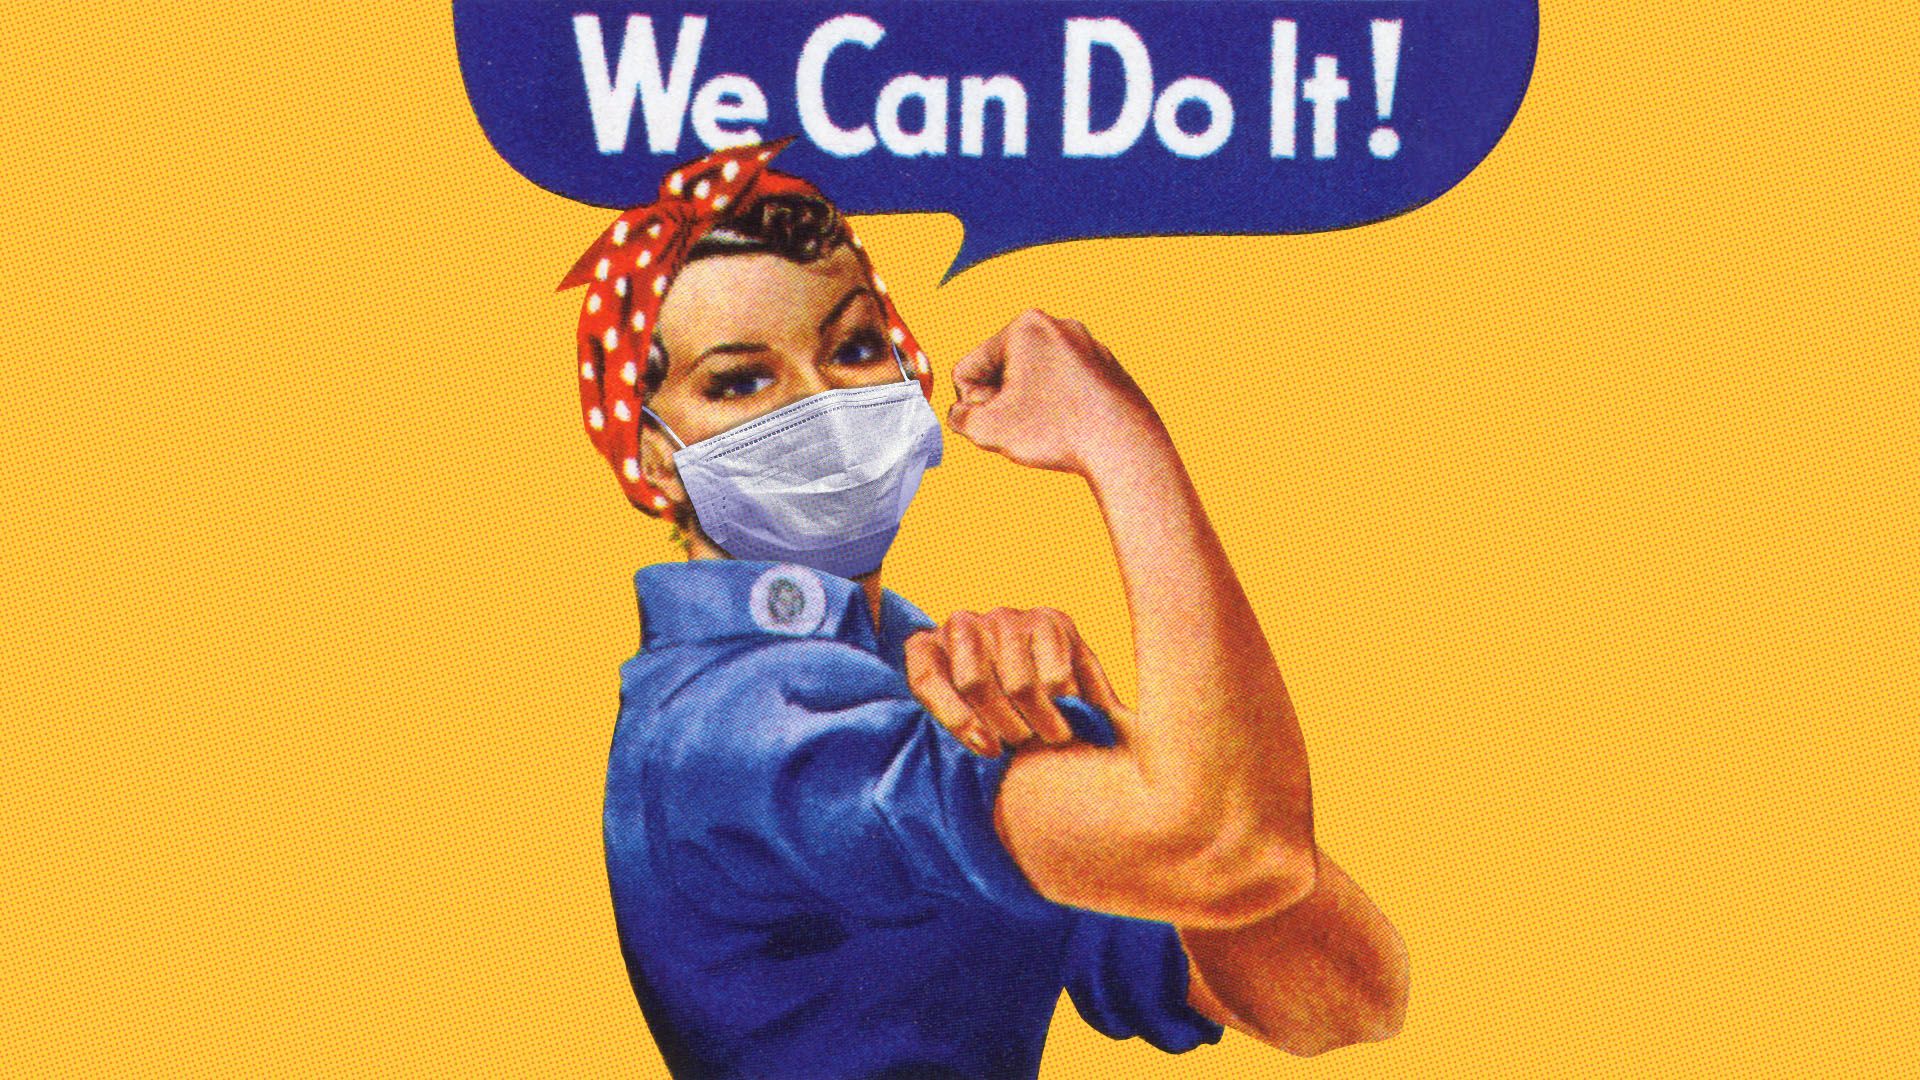 Illustration of Rosie the Riveter wearing a medical mask